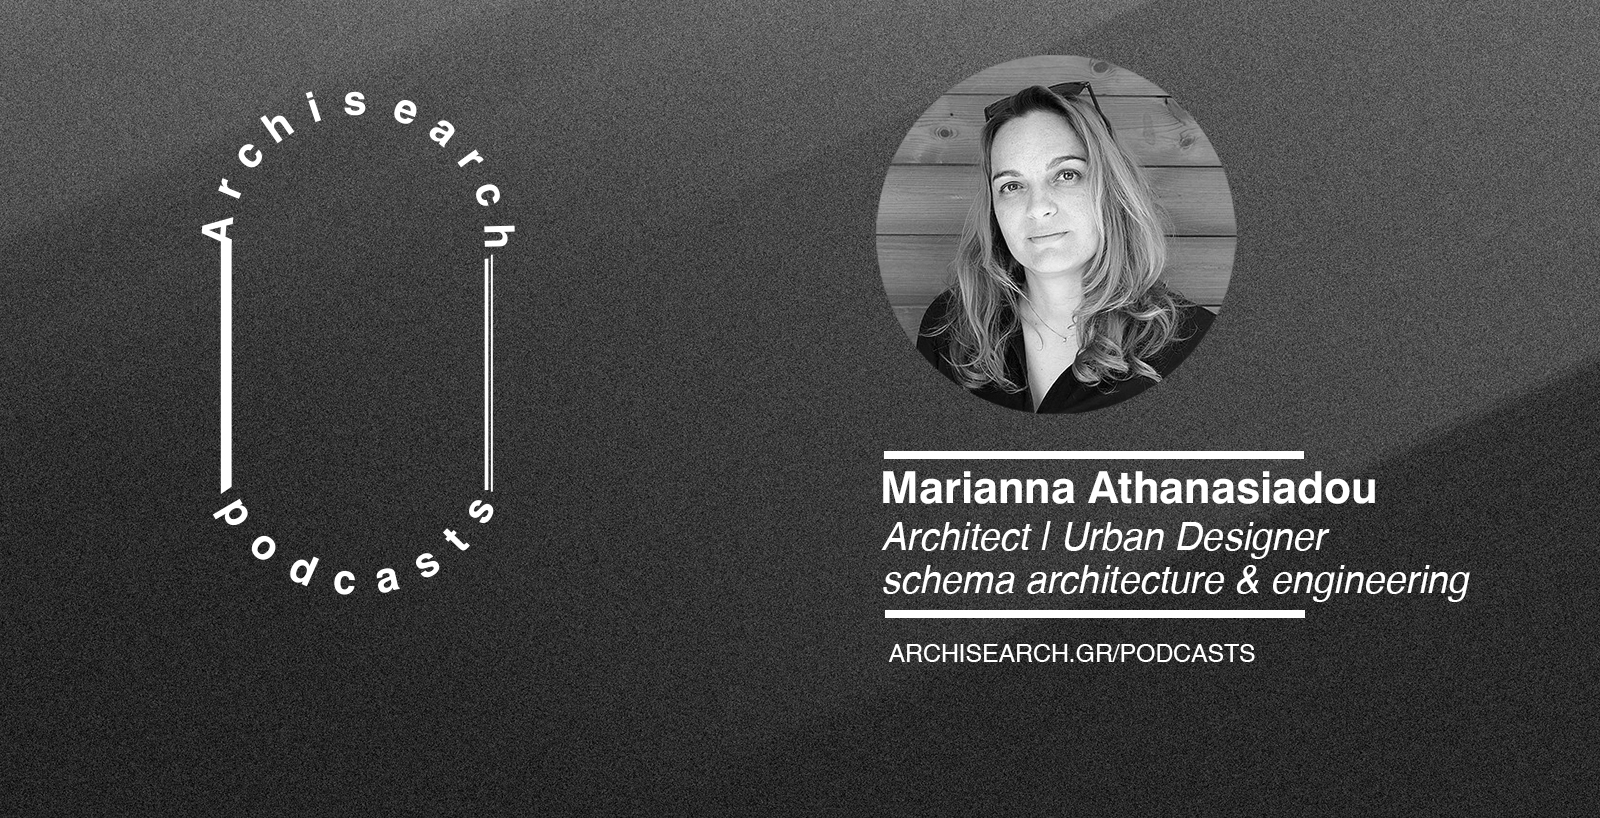 Archisearch Archisearch Talks_Women in Architecture | Marianna Athanasiadou Podcast Recap